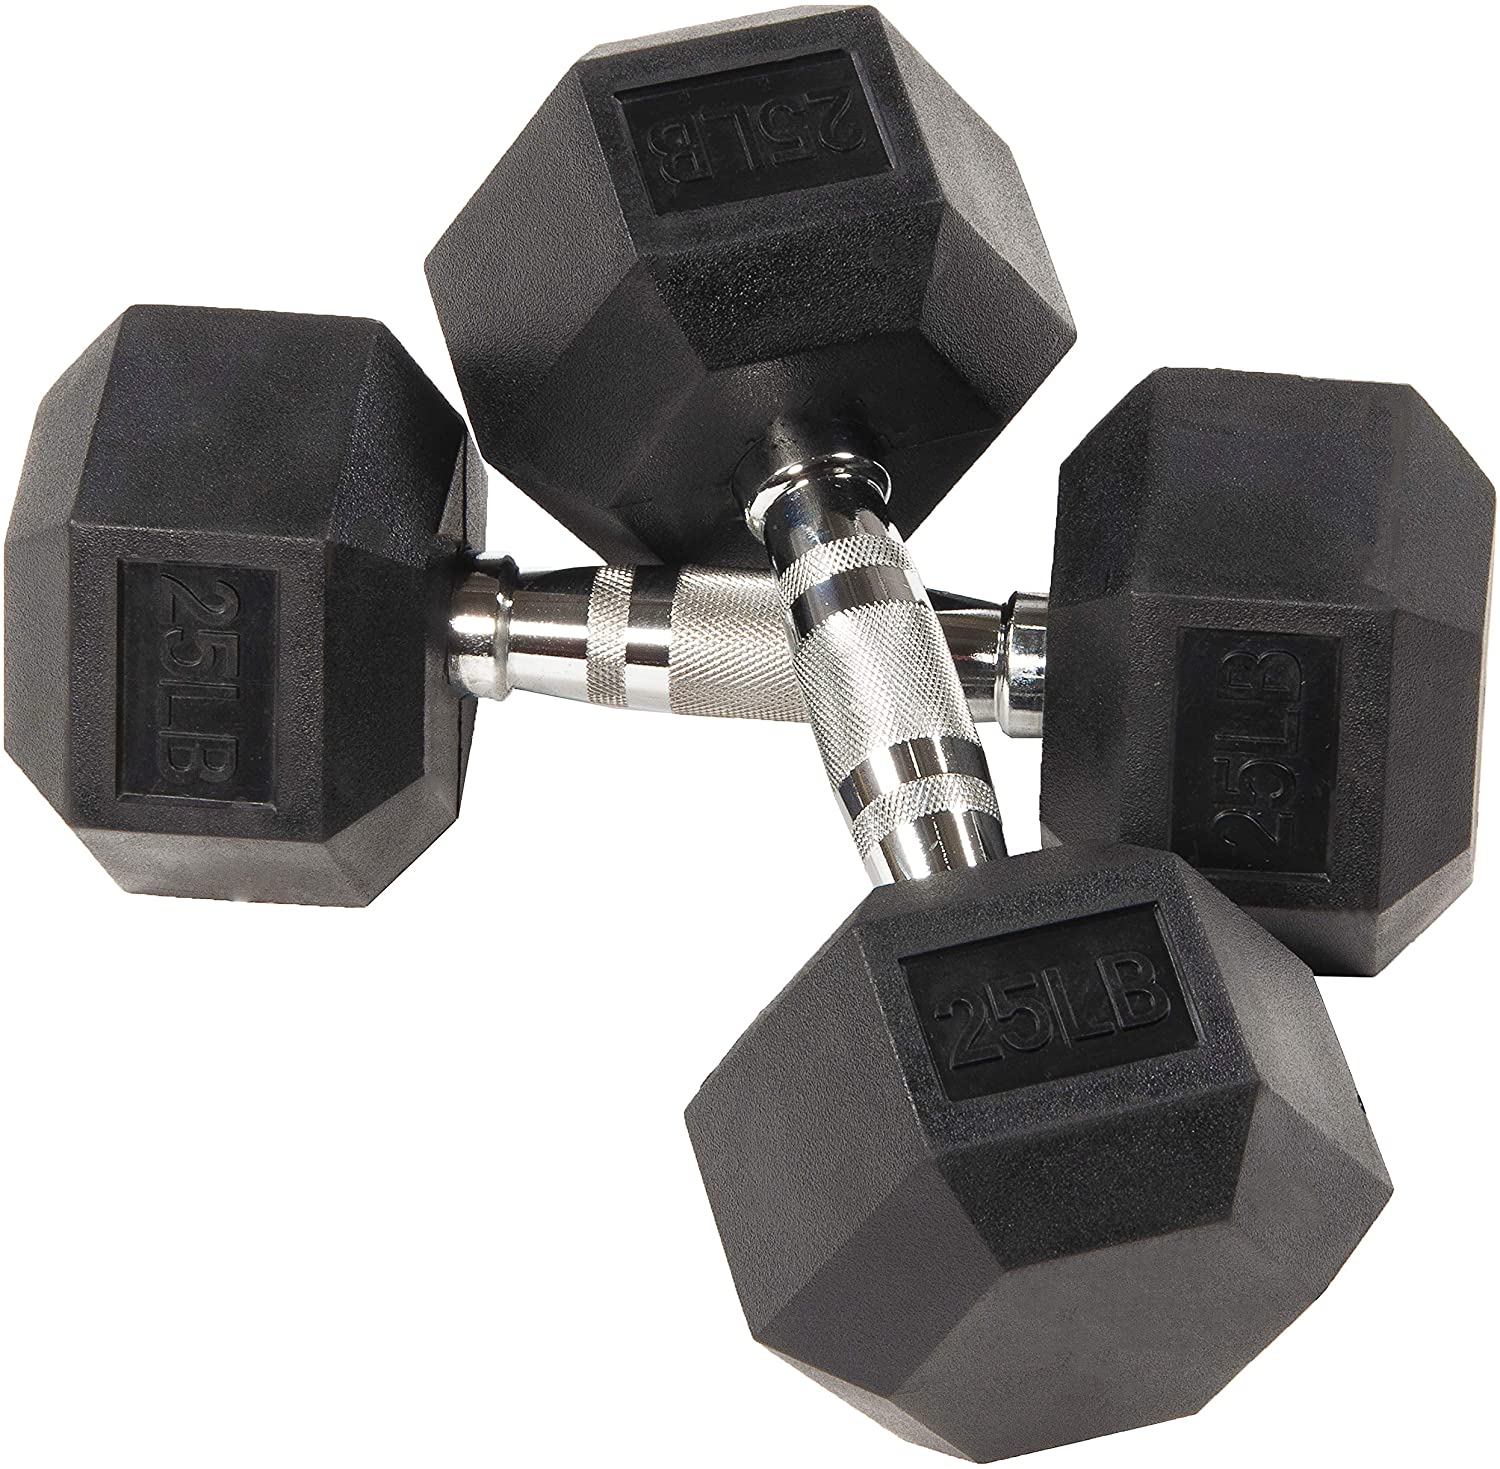 Photo 1 of Balancefrom Rubber Encased Hex Dumbbell in Pairs 25lbs